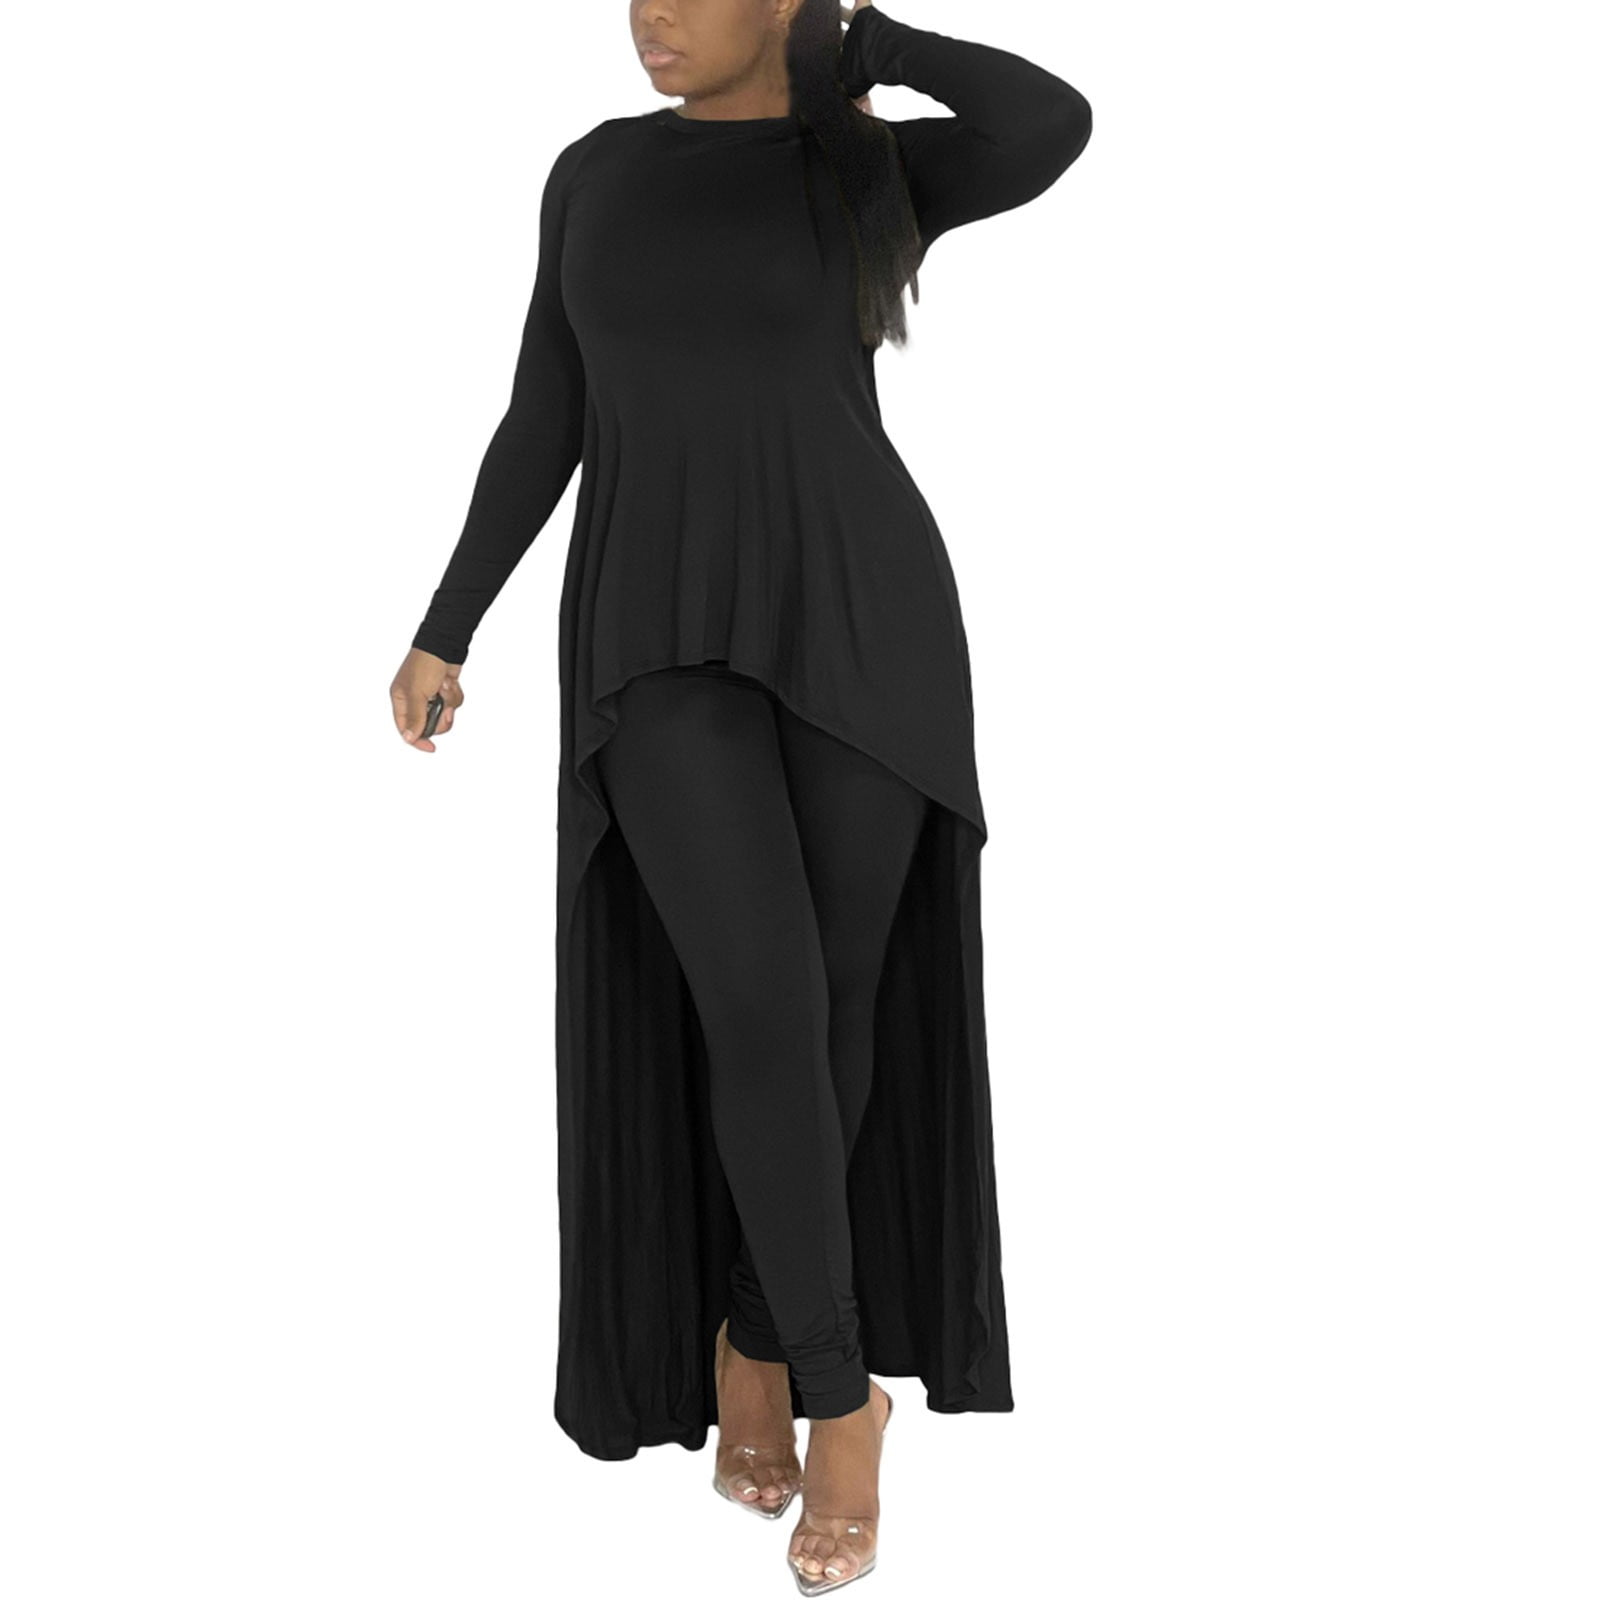 NKOOGH Wedding Pant Suits for Women Elegant Plus Size formal